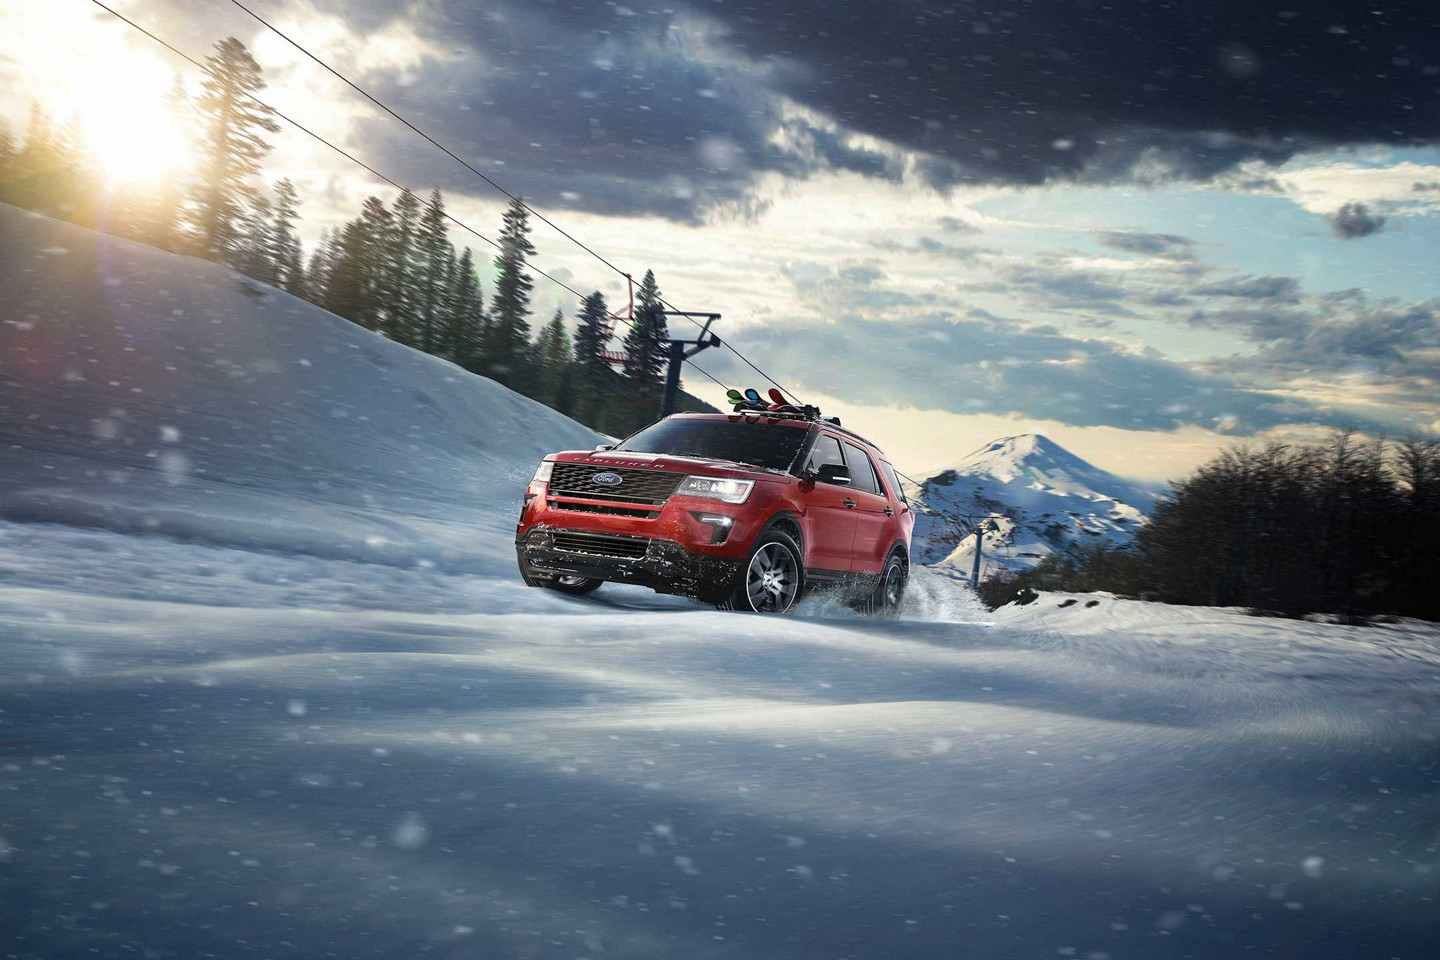 engine-options-of-the-2018-ford-explorer